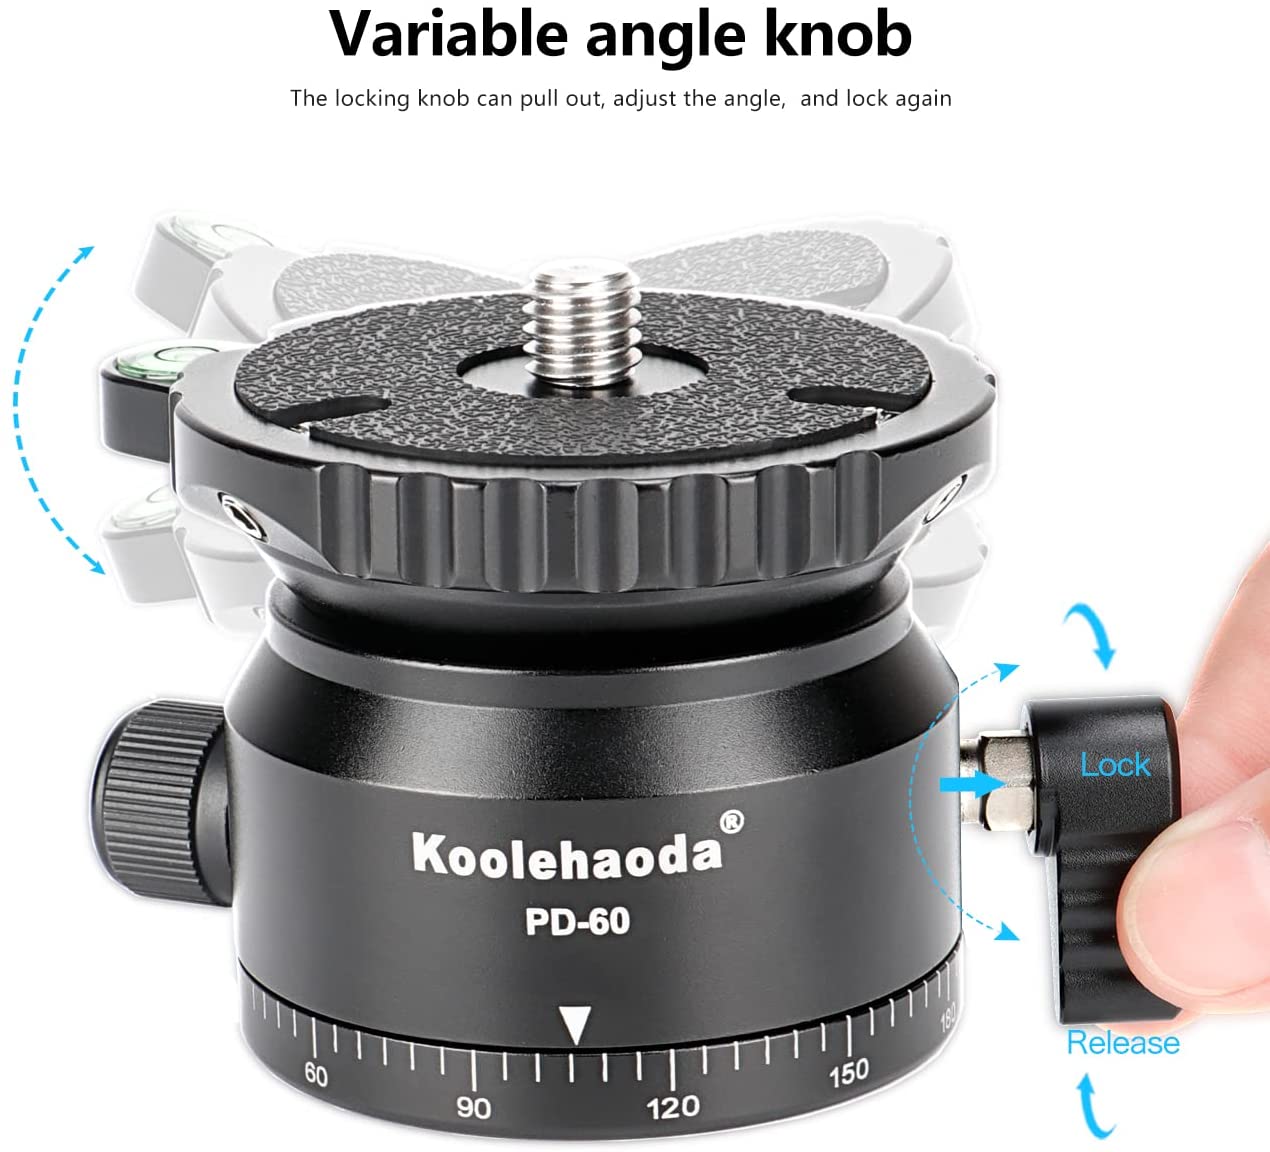 Koolehaoda PD-60 Tripod Leveling Base Camera Leveller,Inclination 15 °, with 3/8" Thread, Offset Bubble Level and 360° Panoramic Base for Video Head,Tripods & Monopods (PD-60)